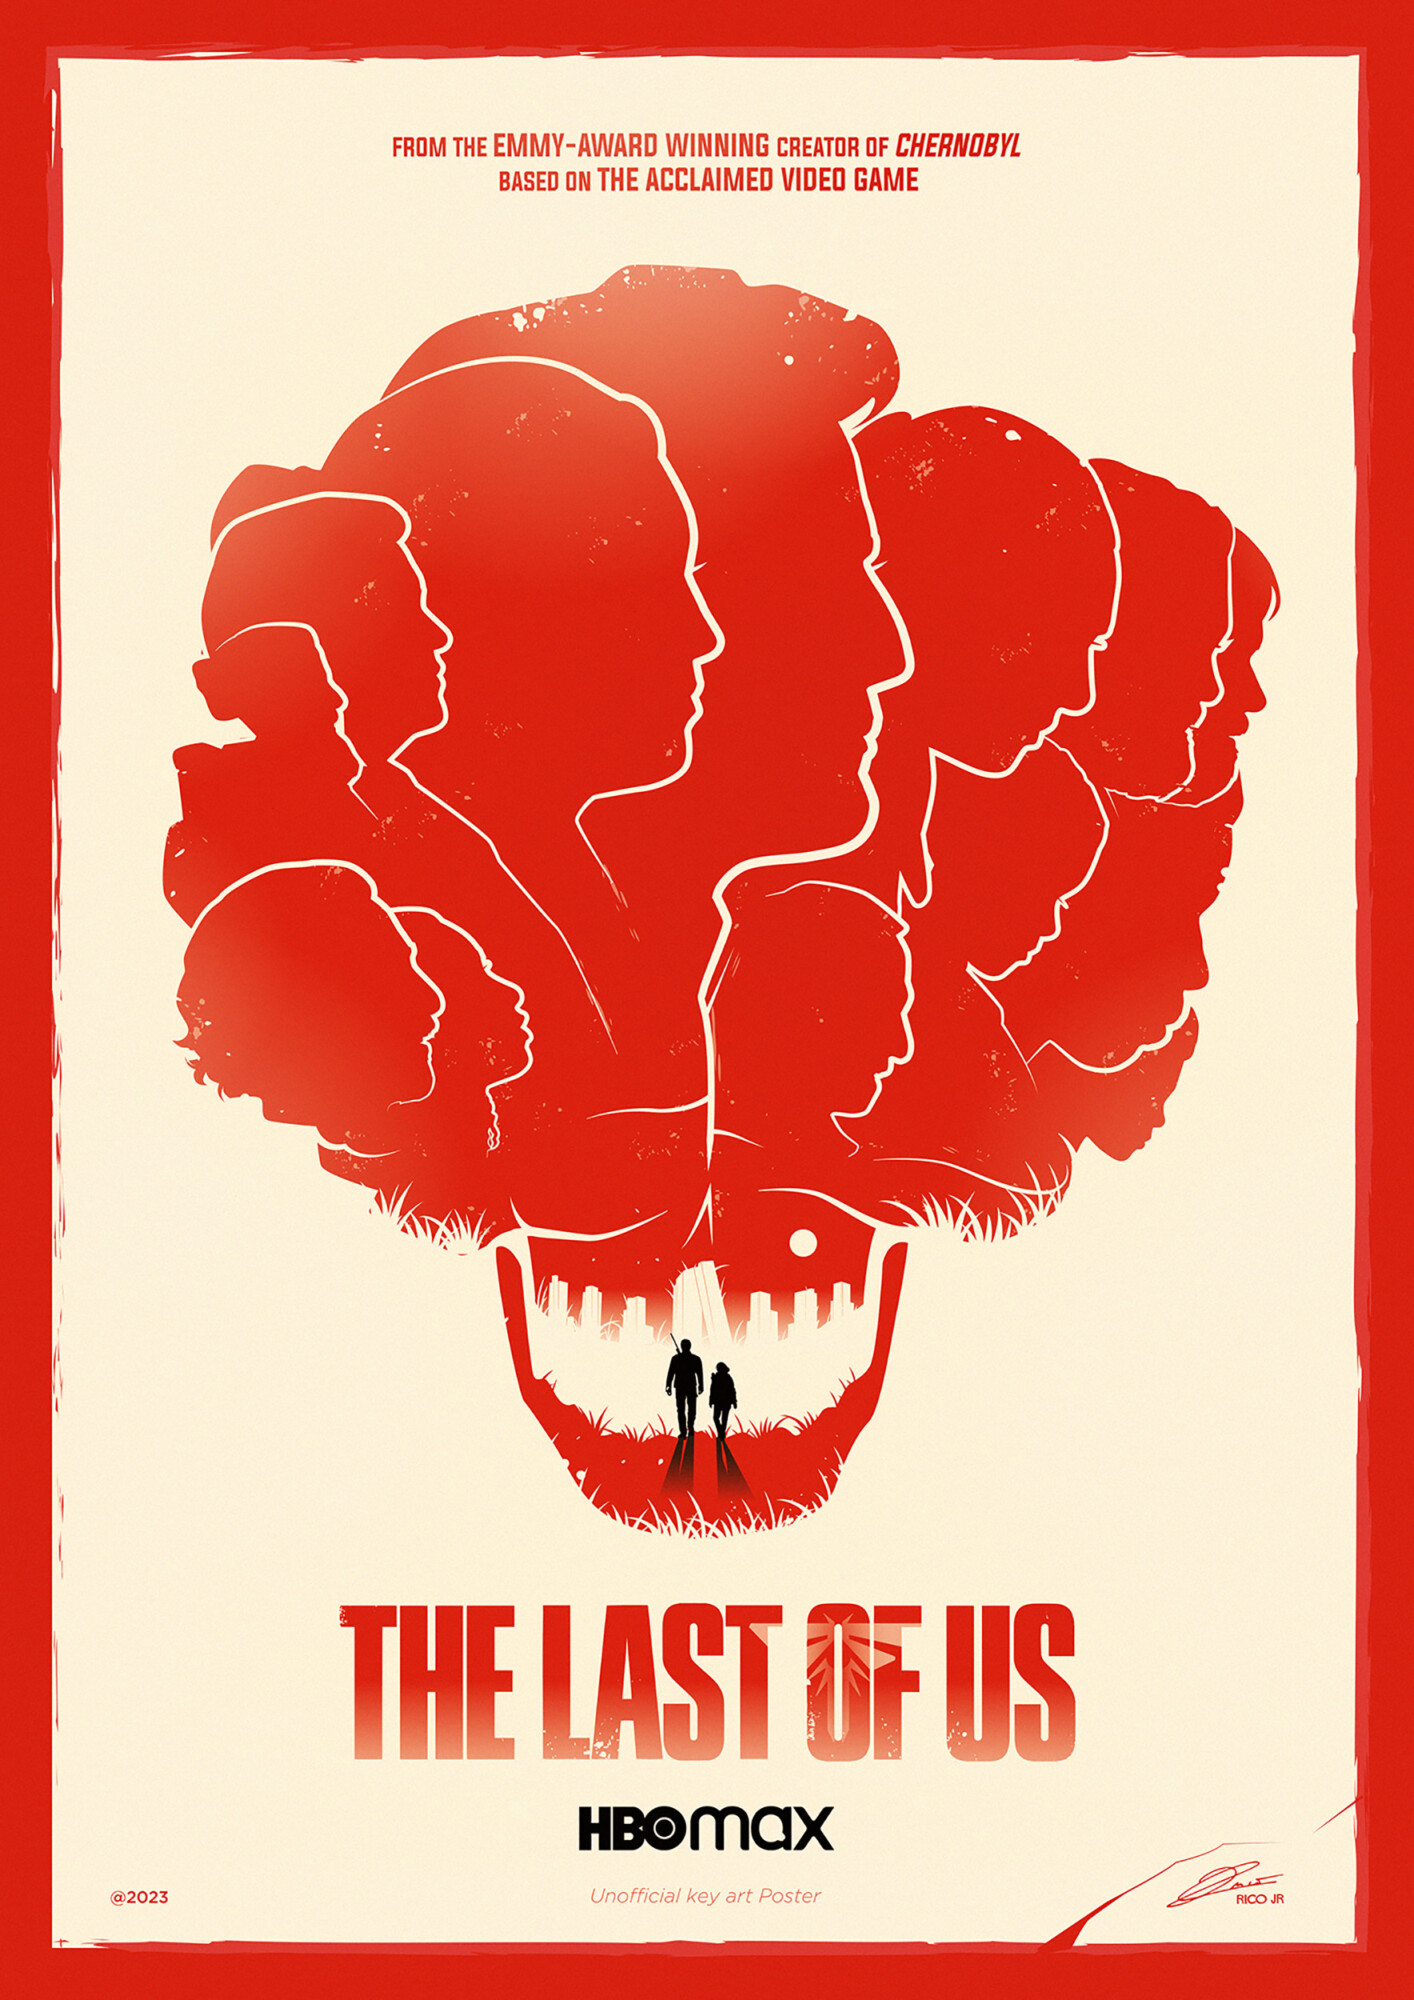 THE LAST OF US (HBO) Poster Art